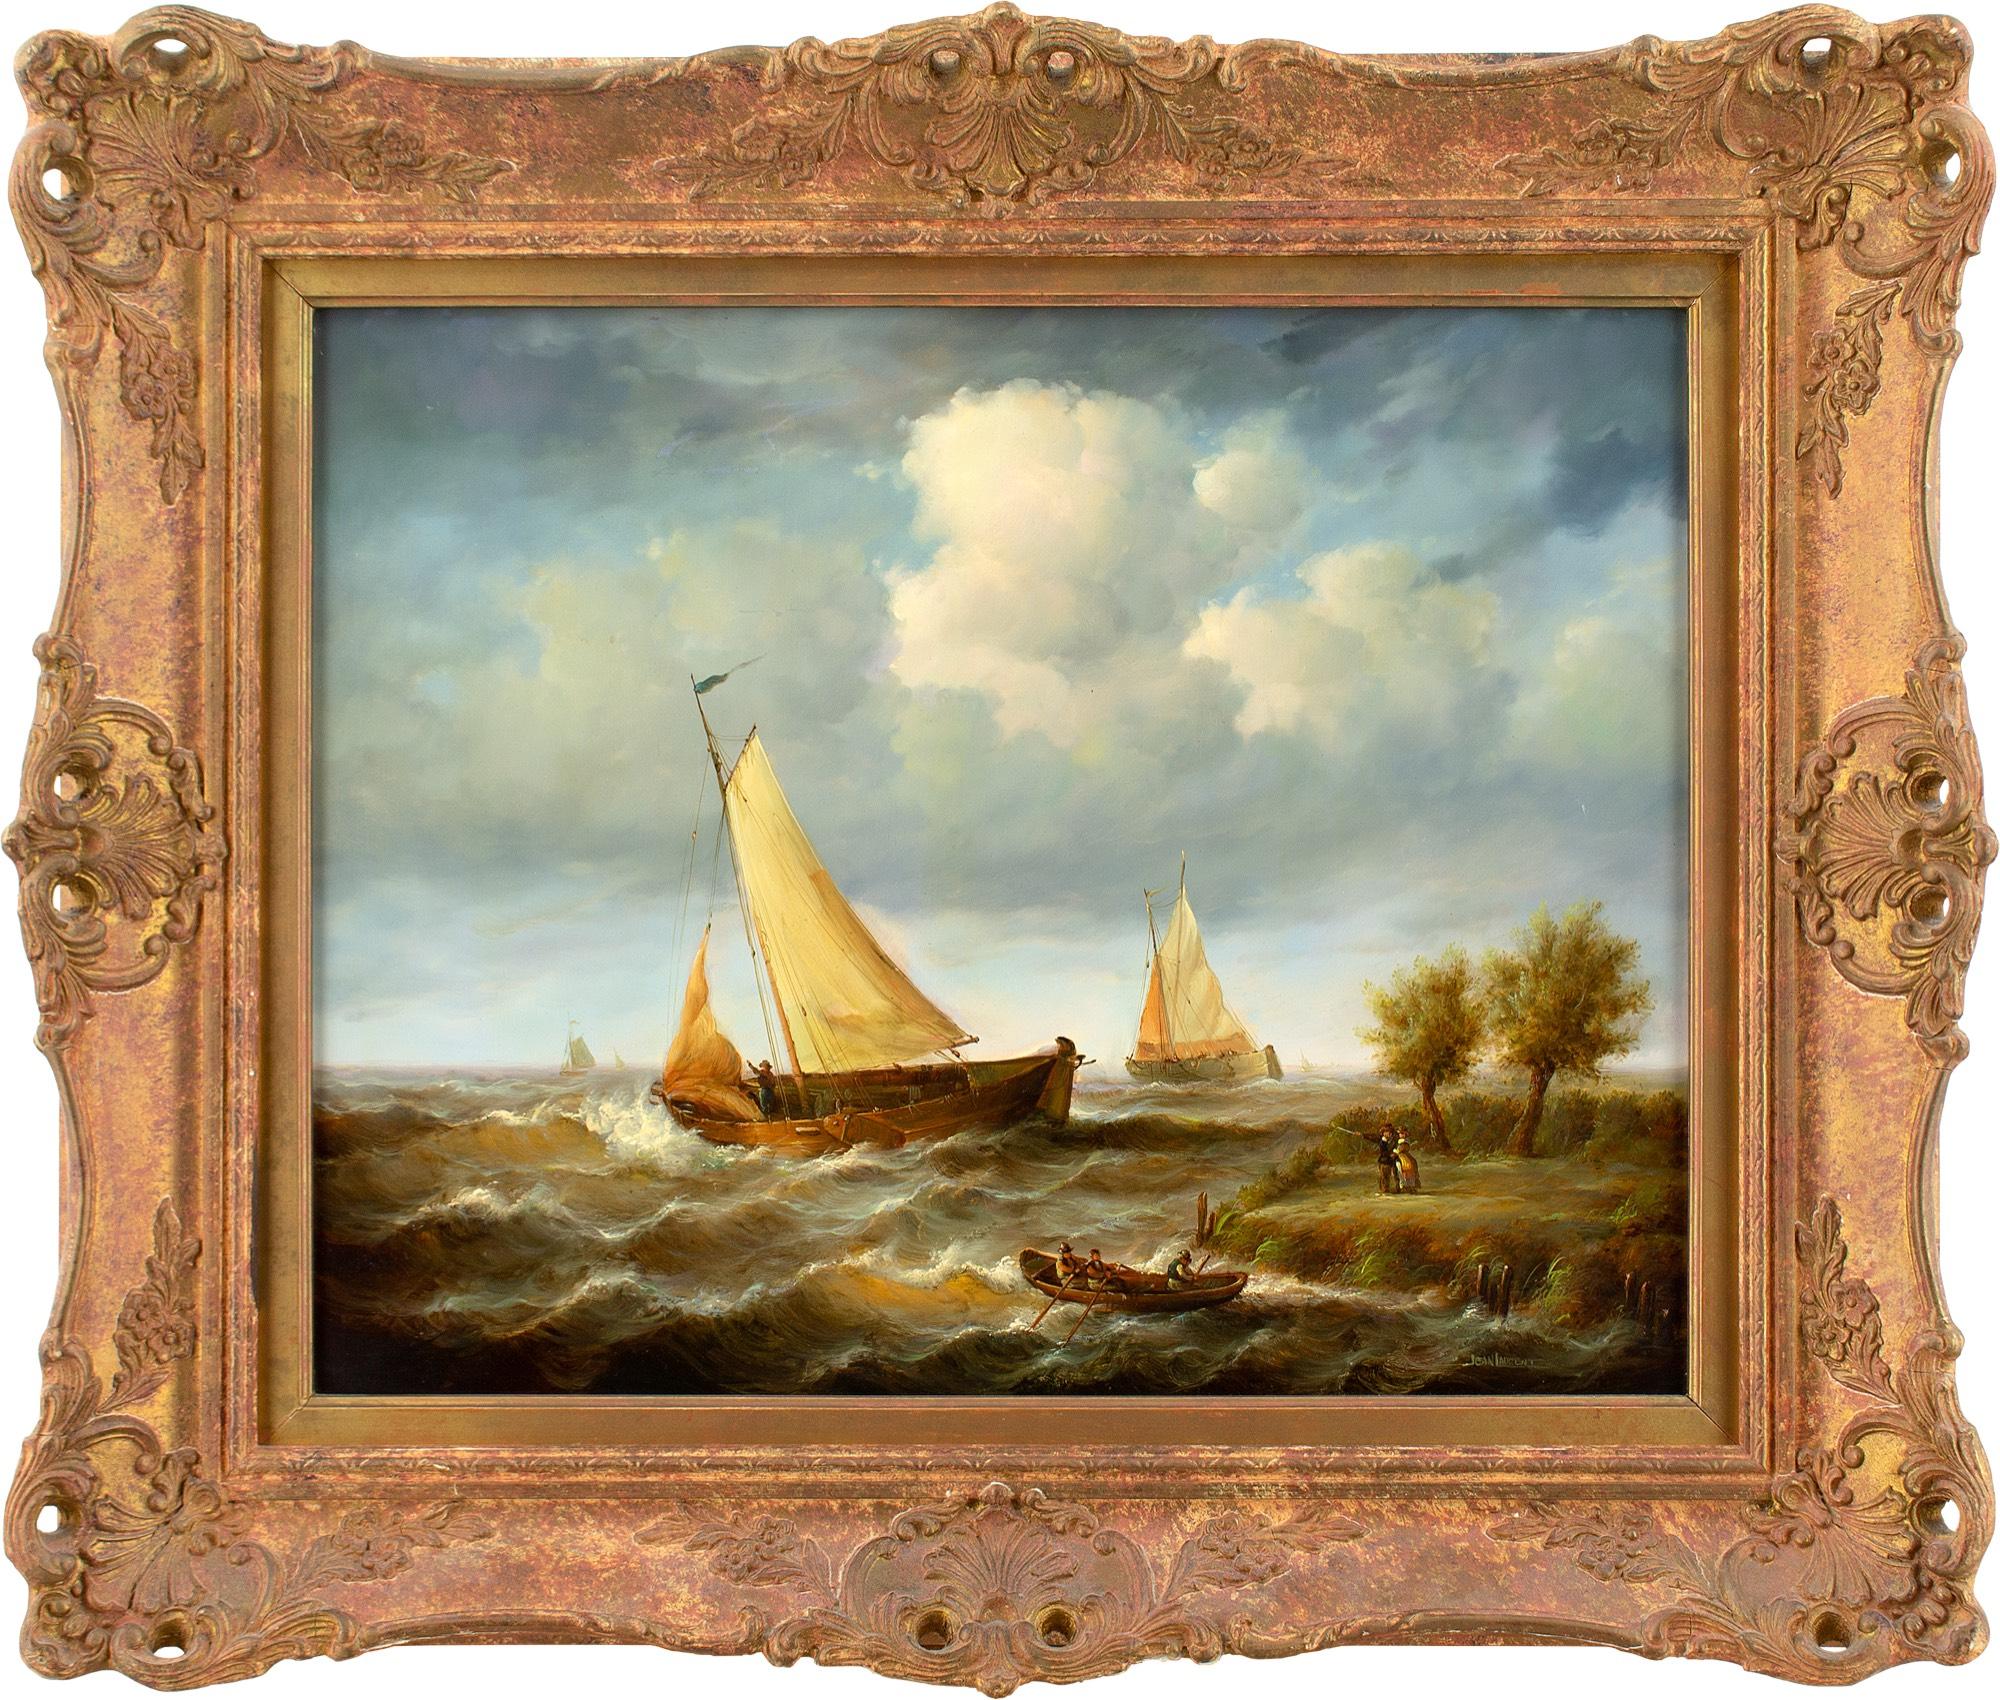 This bright and vibrant mid-20th-century oil painting by French artist Jean Laurent (1898-1988) depicts several sailboats and a rowboat buffeted by the waves while a smartly attired couple looks on. It’s an homage to the masters of